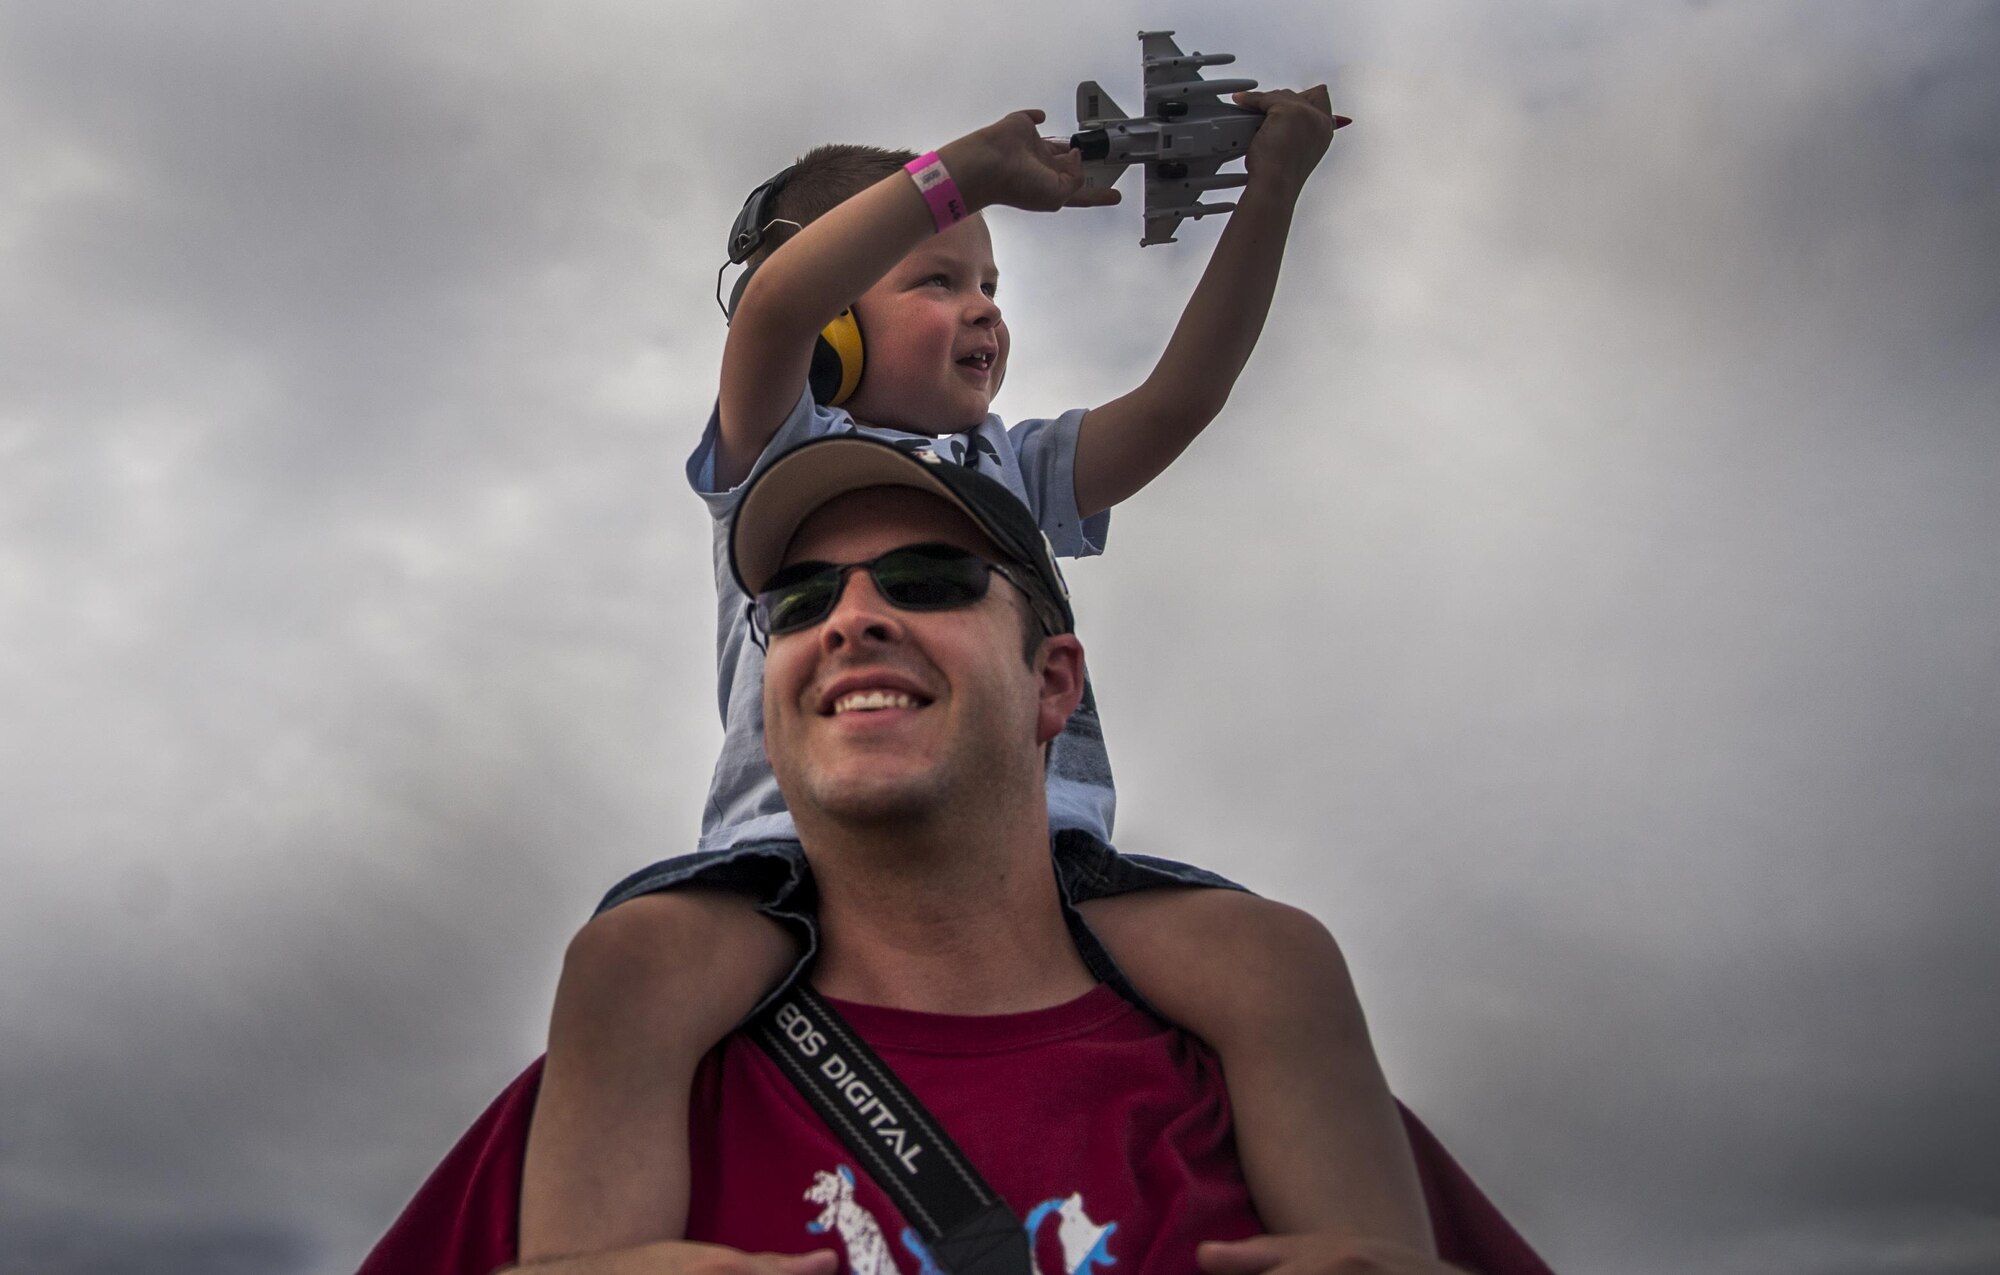 A young child sits on his father’s shoulders during the U.S. Air Force Thunderbirds Air Demonstration Squadron aerial performance at the Aviation Nation air show on Nellis Air Force Base, Nev., Nov. 12, 2016. This event marked the end of the air show season for the U.S. Air Force Air Demonstration Squadron, the Thunderbirds. (U.S. Air Force photo by Airman 1st Class Kevin Tanenbaum/Released)